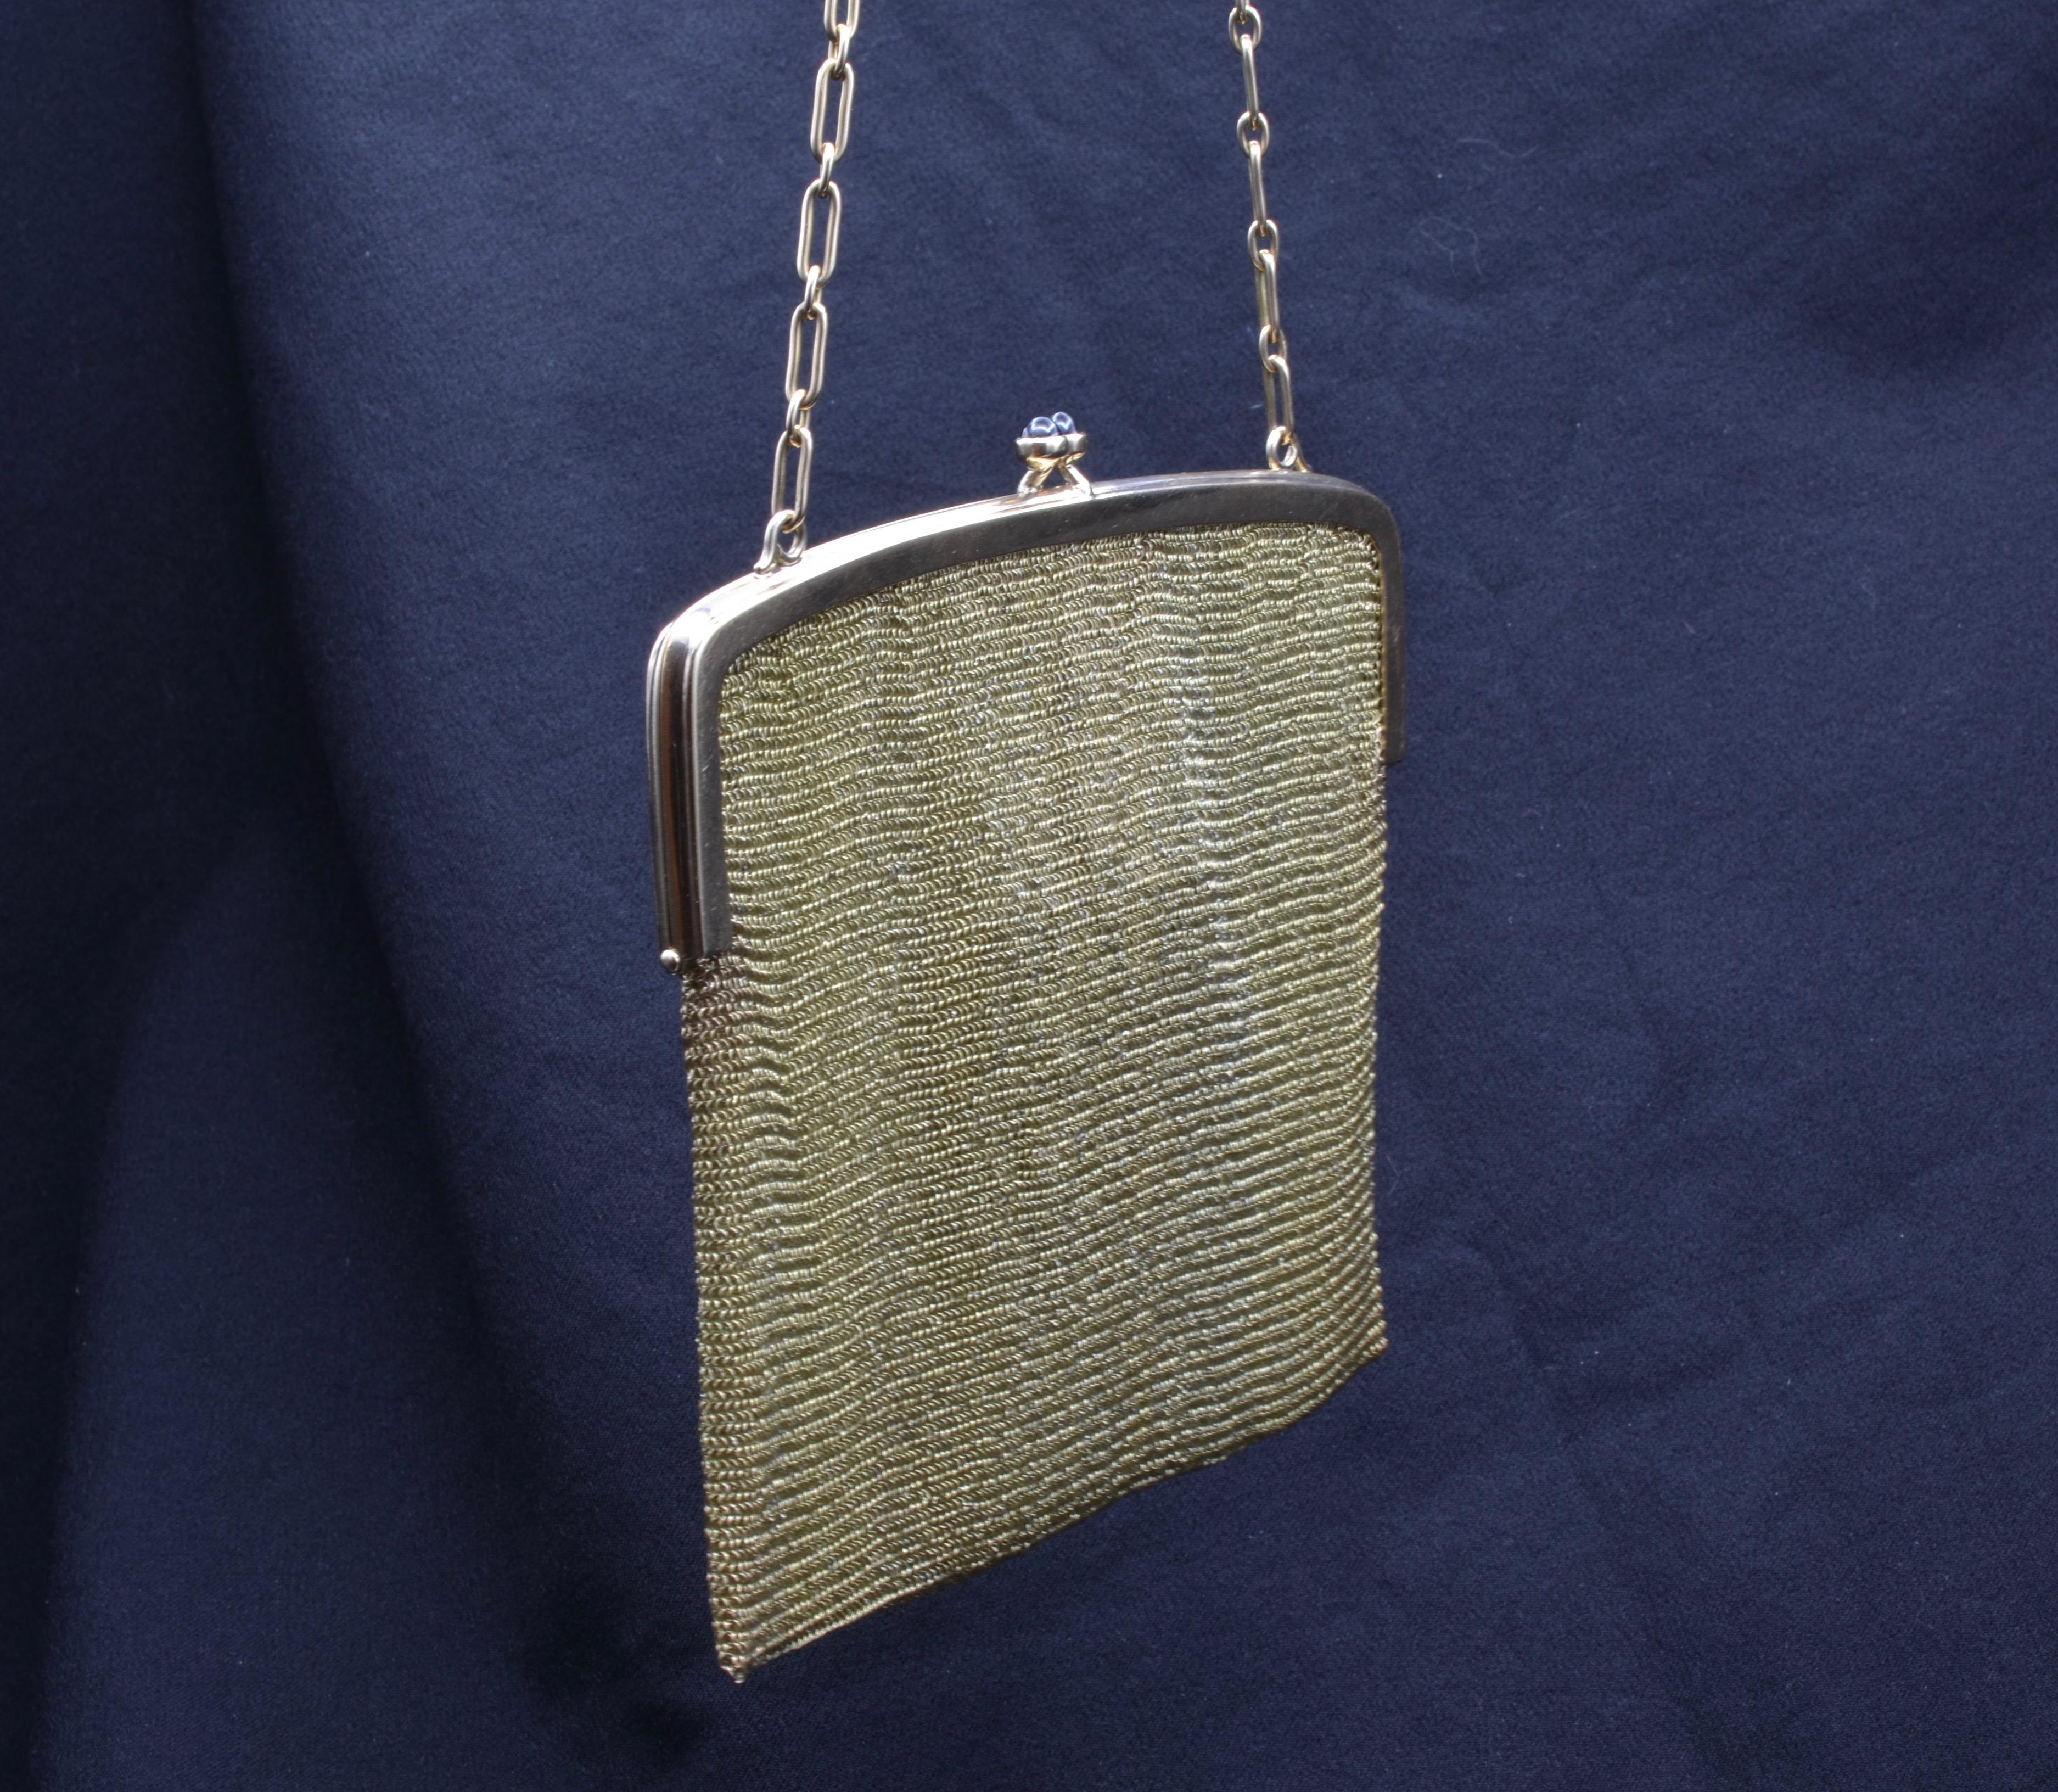 This elegantly designed 14K yellow gold mesh purse was crafted by an American jewelry house, Lebolt & Co.  Lebolt & Co began making jewelry around 1915 and ceased metalwork production during World War II. They made quality jewelry, such as this